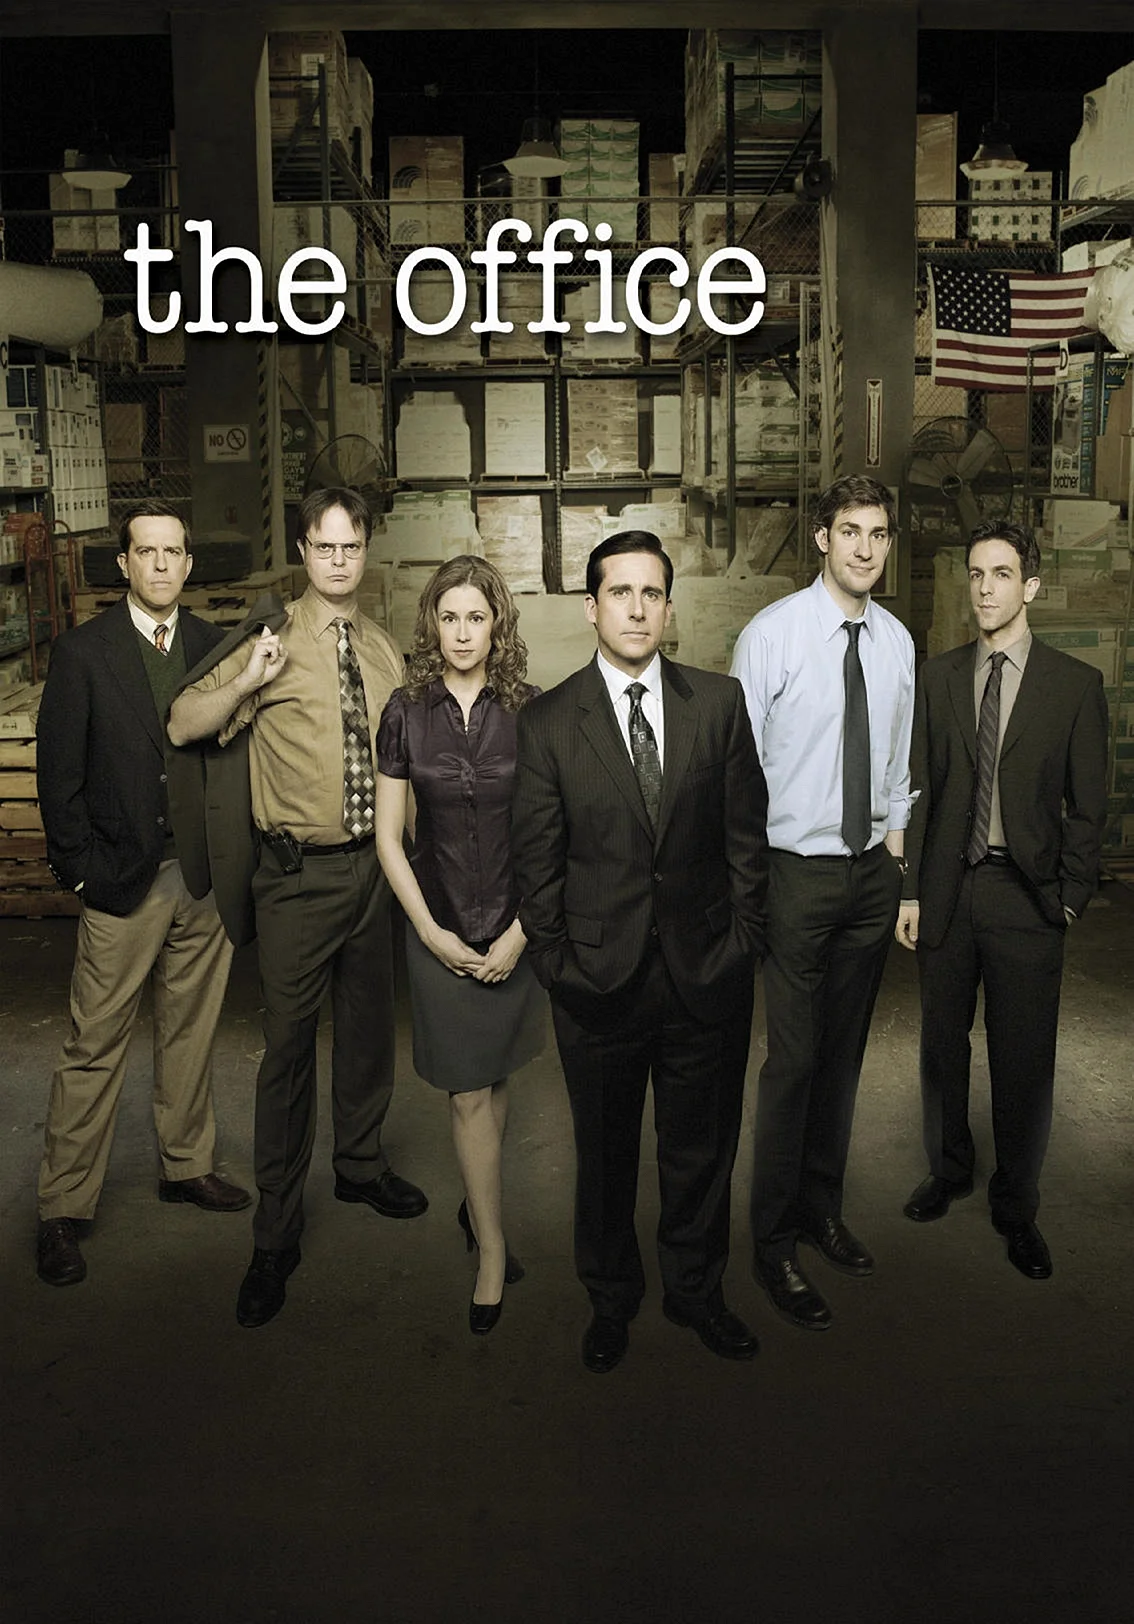 The Office Poster Wallpaper For iPhone